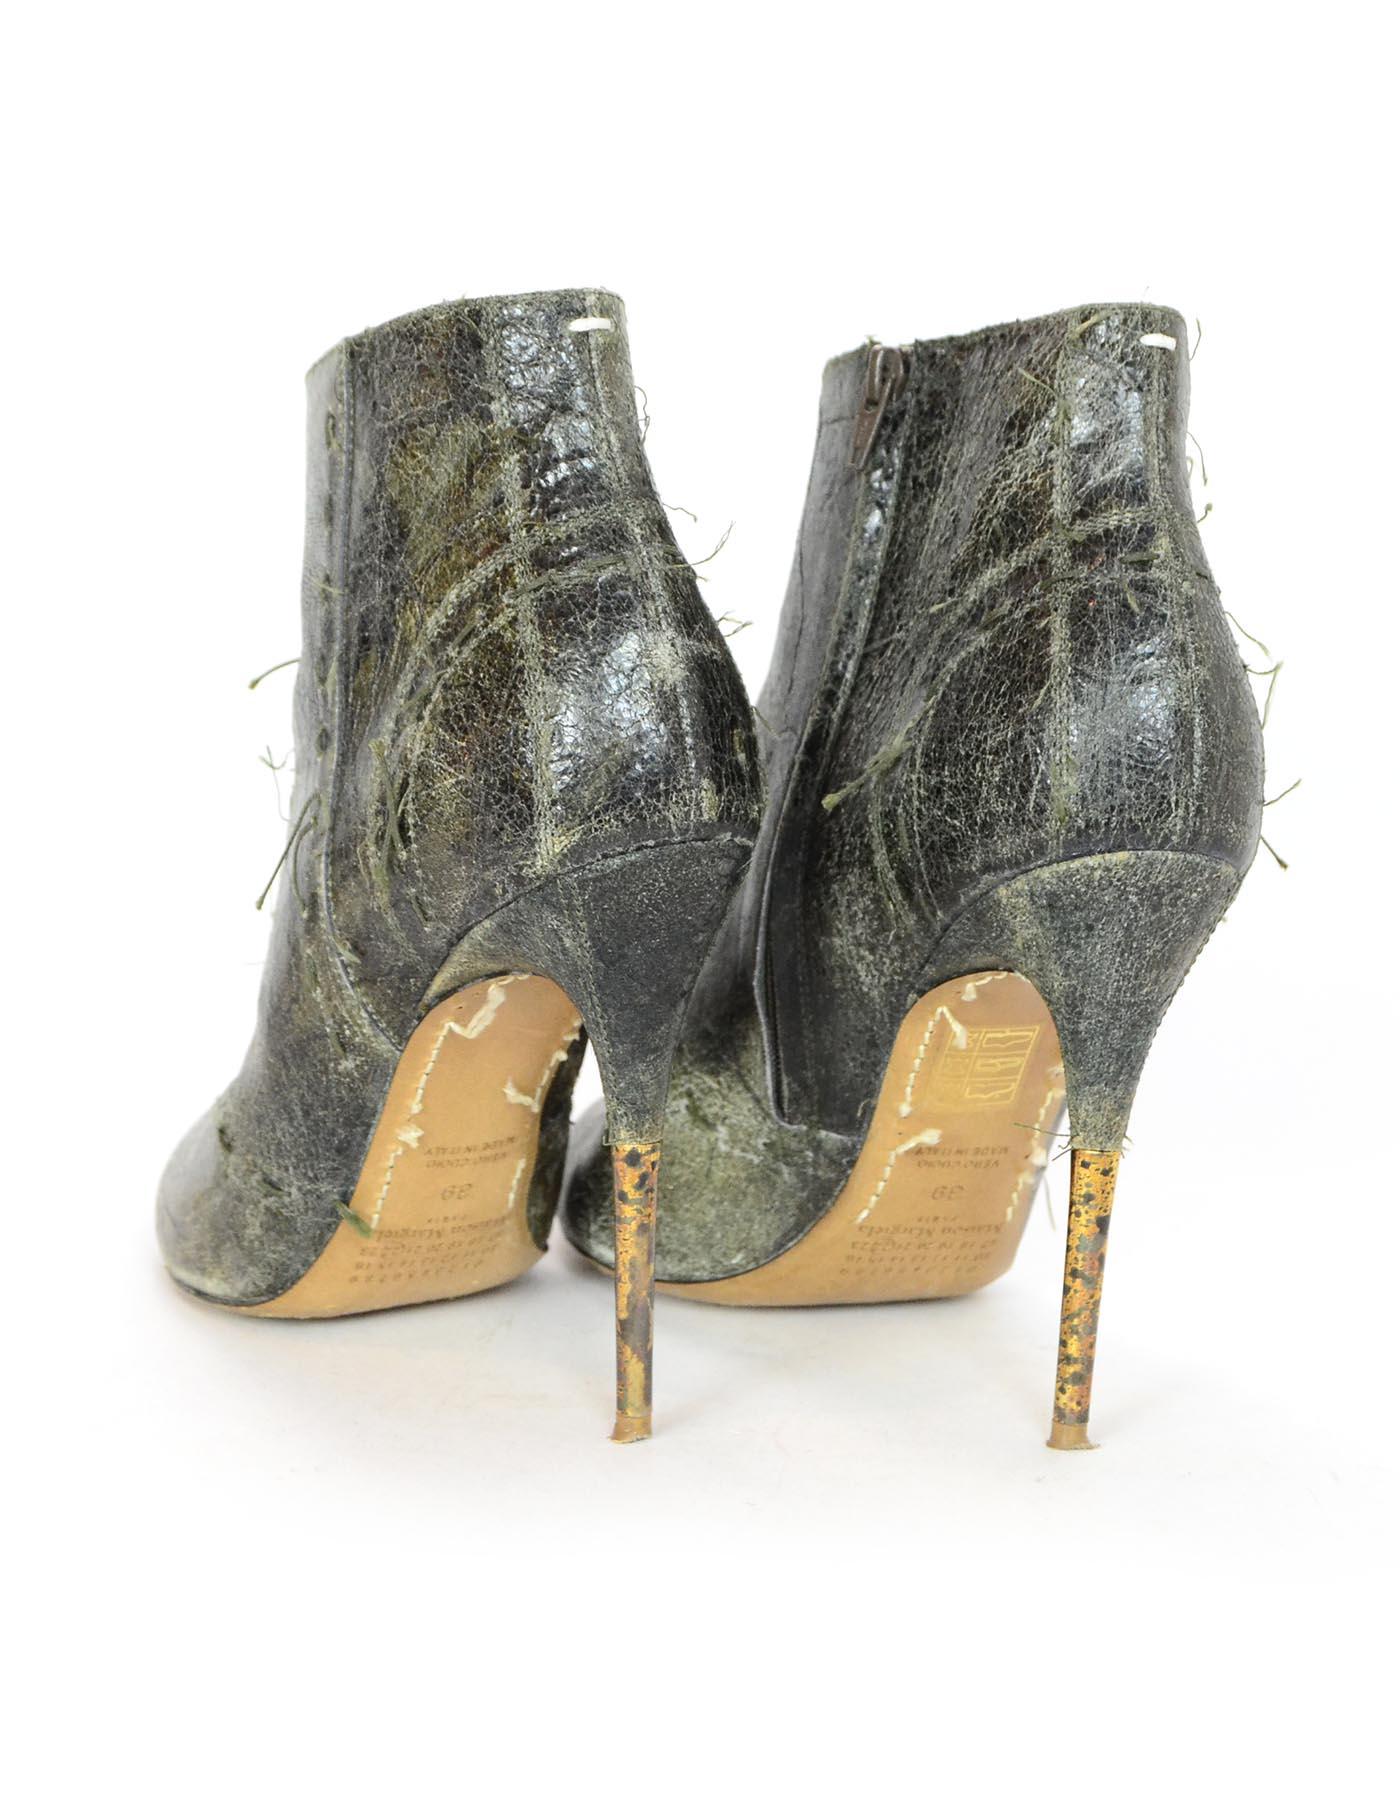 Maison Margiela Distressed Green Leather Heeled Booties Sz 39 In Excellent Condition In New York, NY